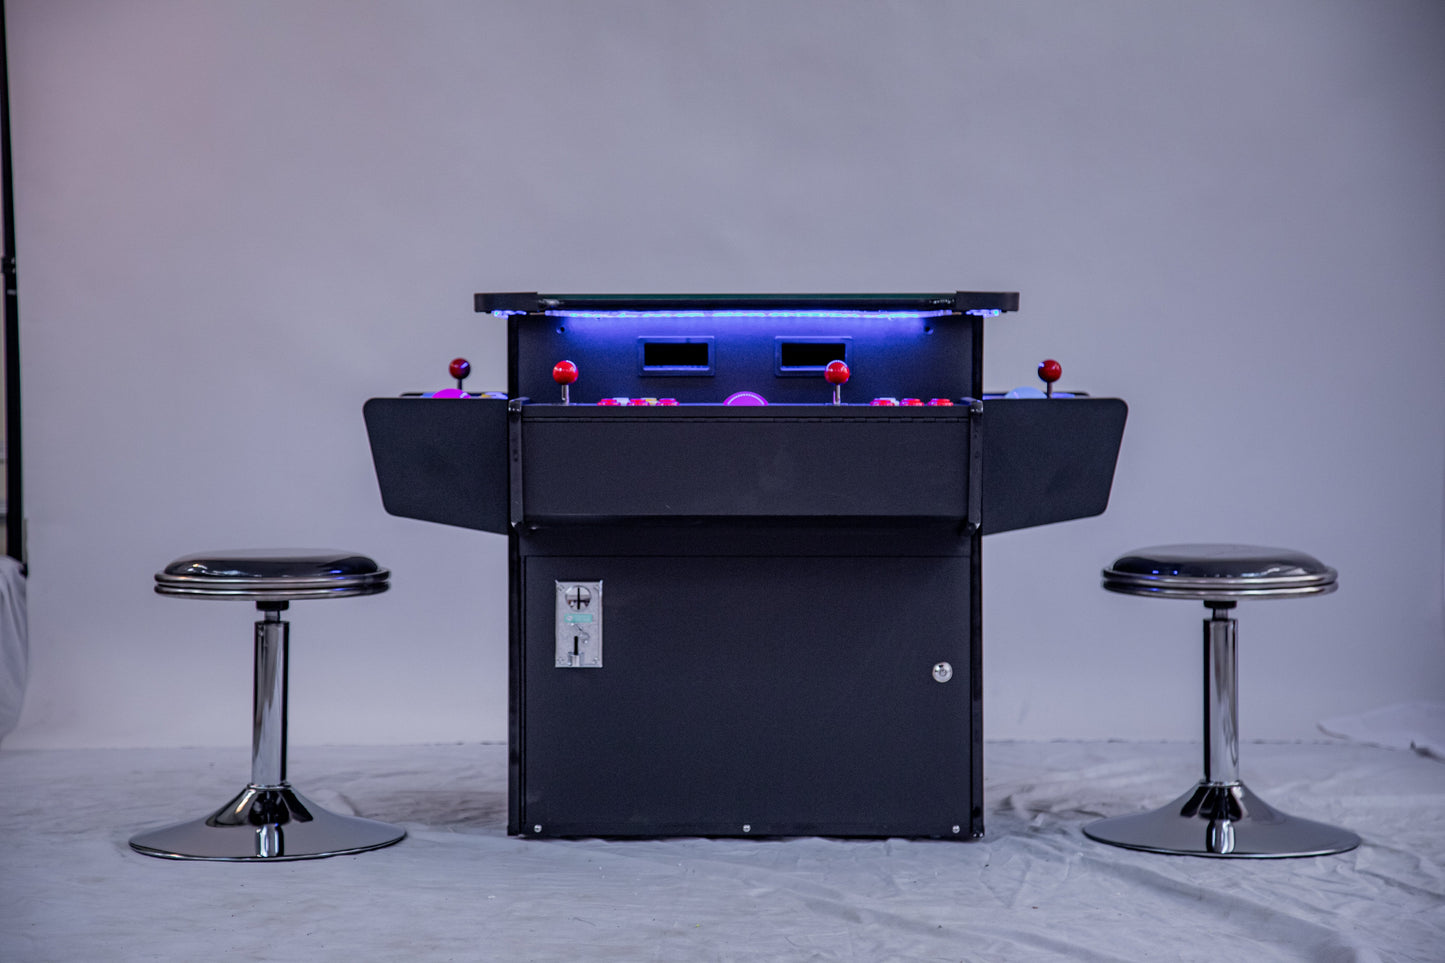 Full-sized, 3 Sided, Cocktail Table Arcade Game With 3,016 Classic, Golden Age, and Retro Games with Trackball